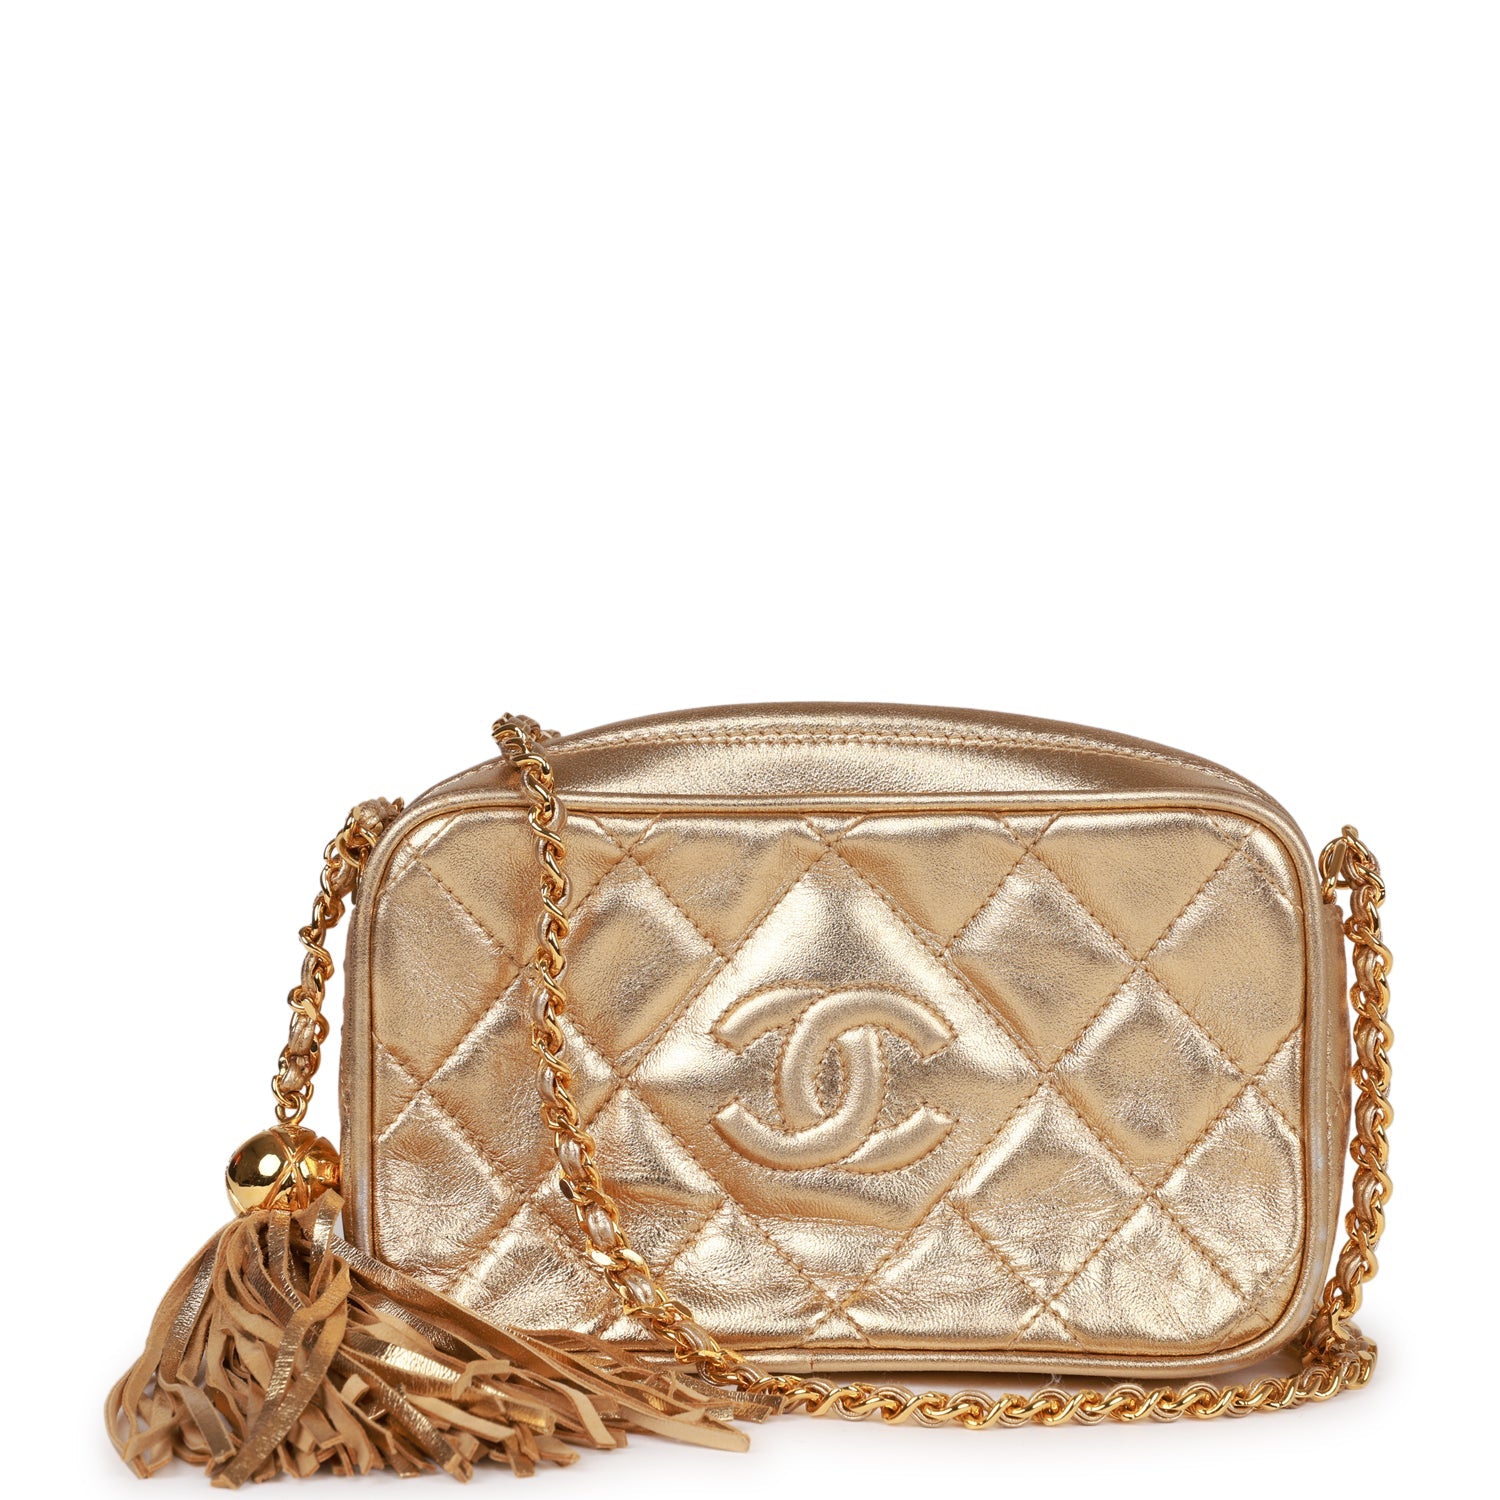 Trending Now 💄 CHANEL Vintage Bags & Jewelry - Madison Avenue Couture